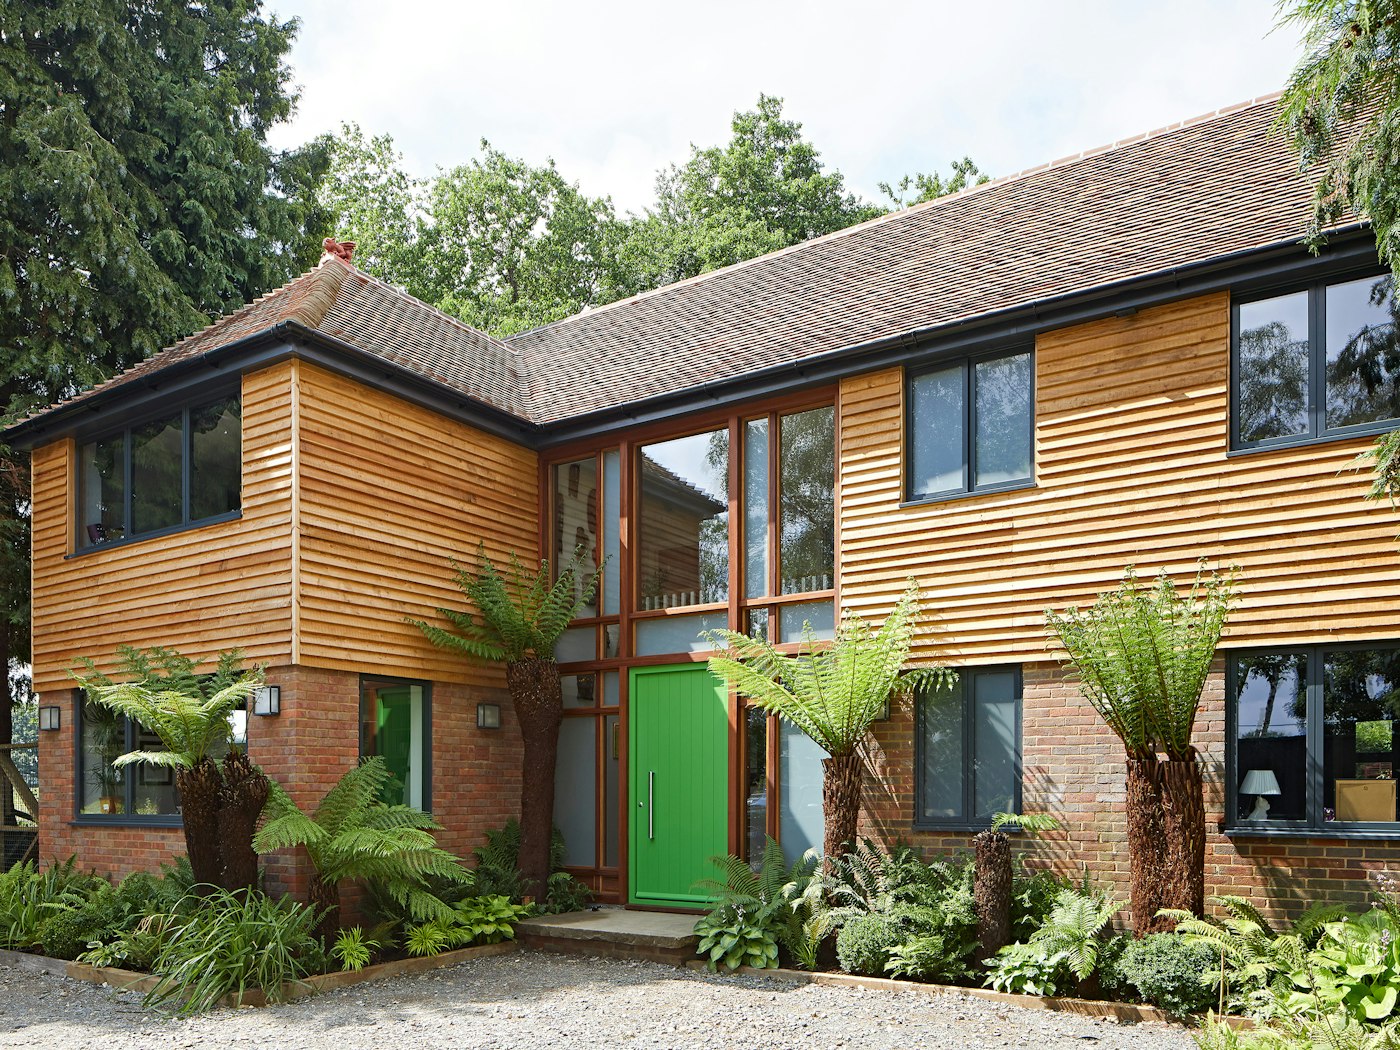 While the vibrant green door is clearly an eye-catcher, the natural oak cladding across the first floor frontage ensures the whole facade creates impact